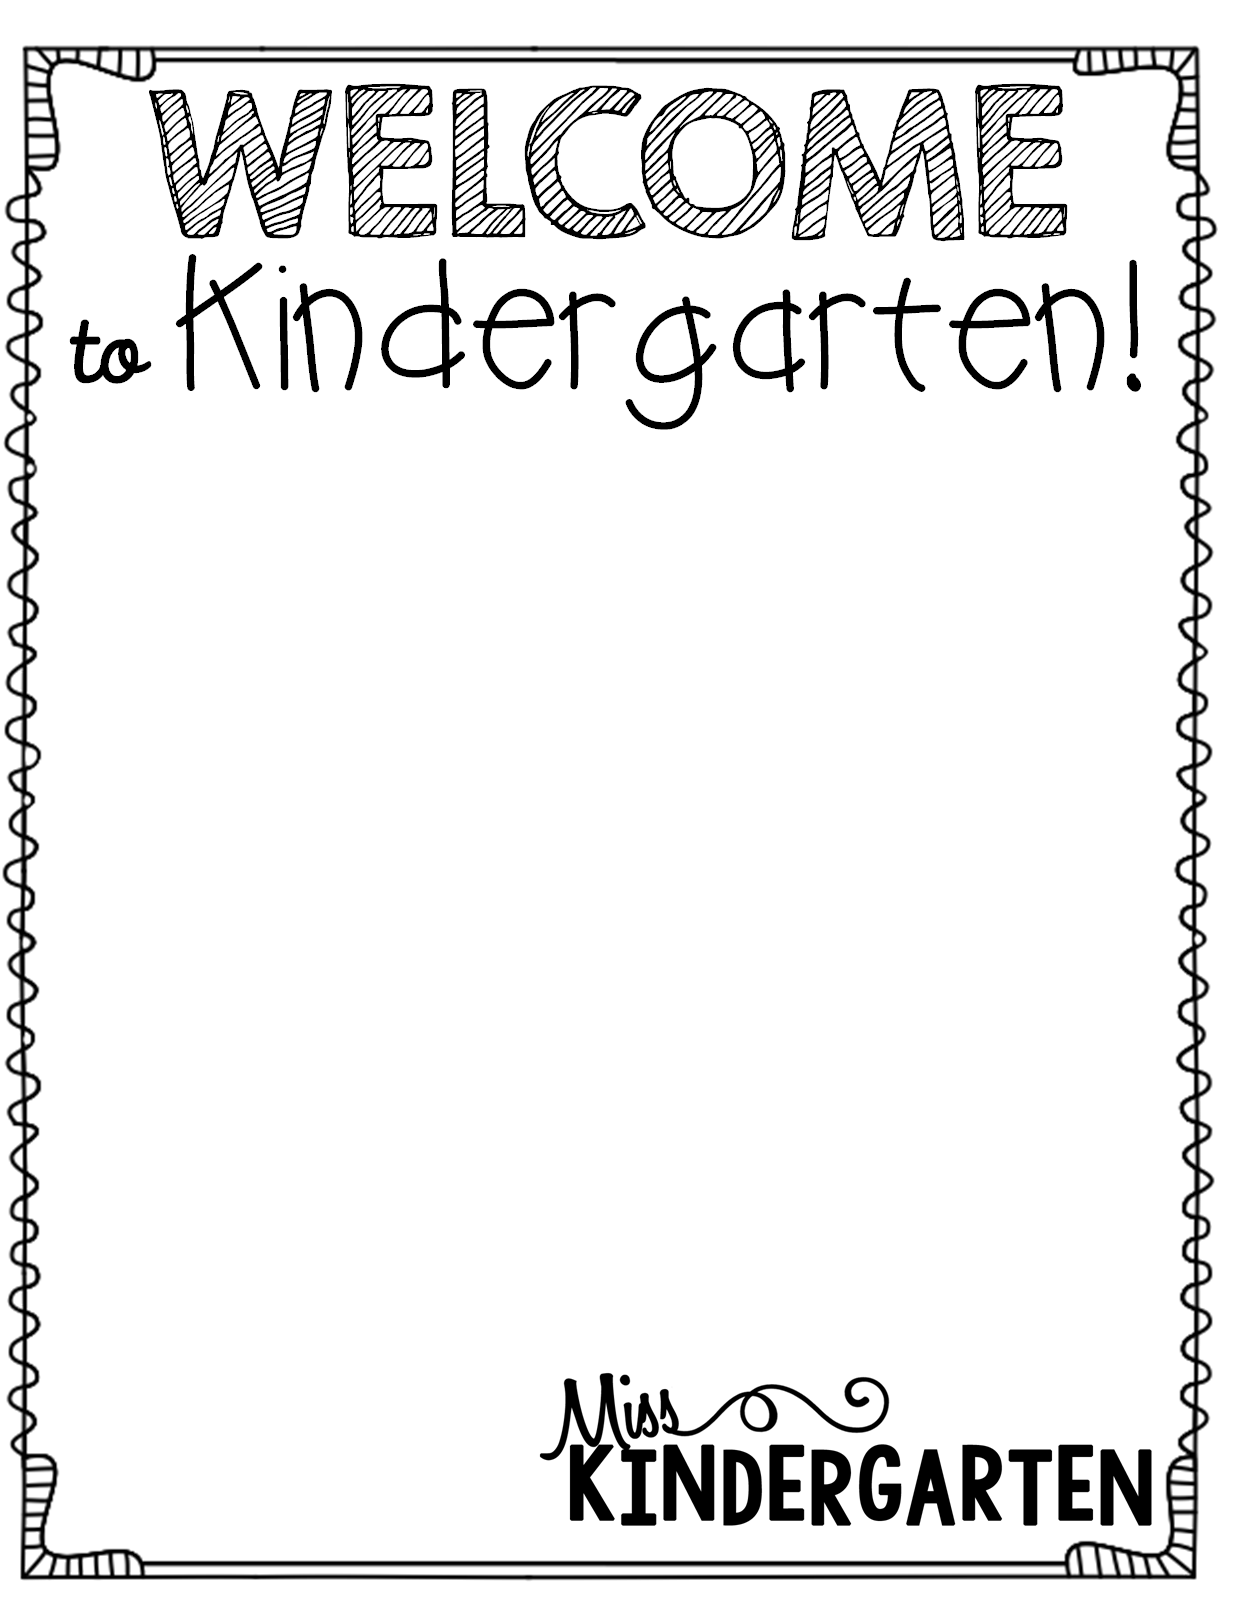 Welcome To Kindergarten Clipart Black And White.